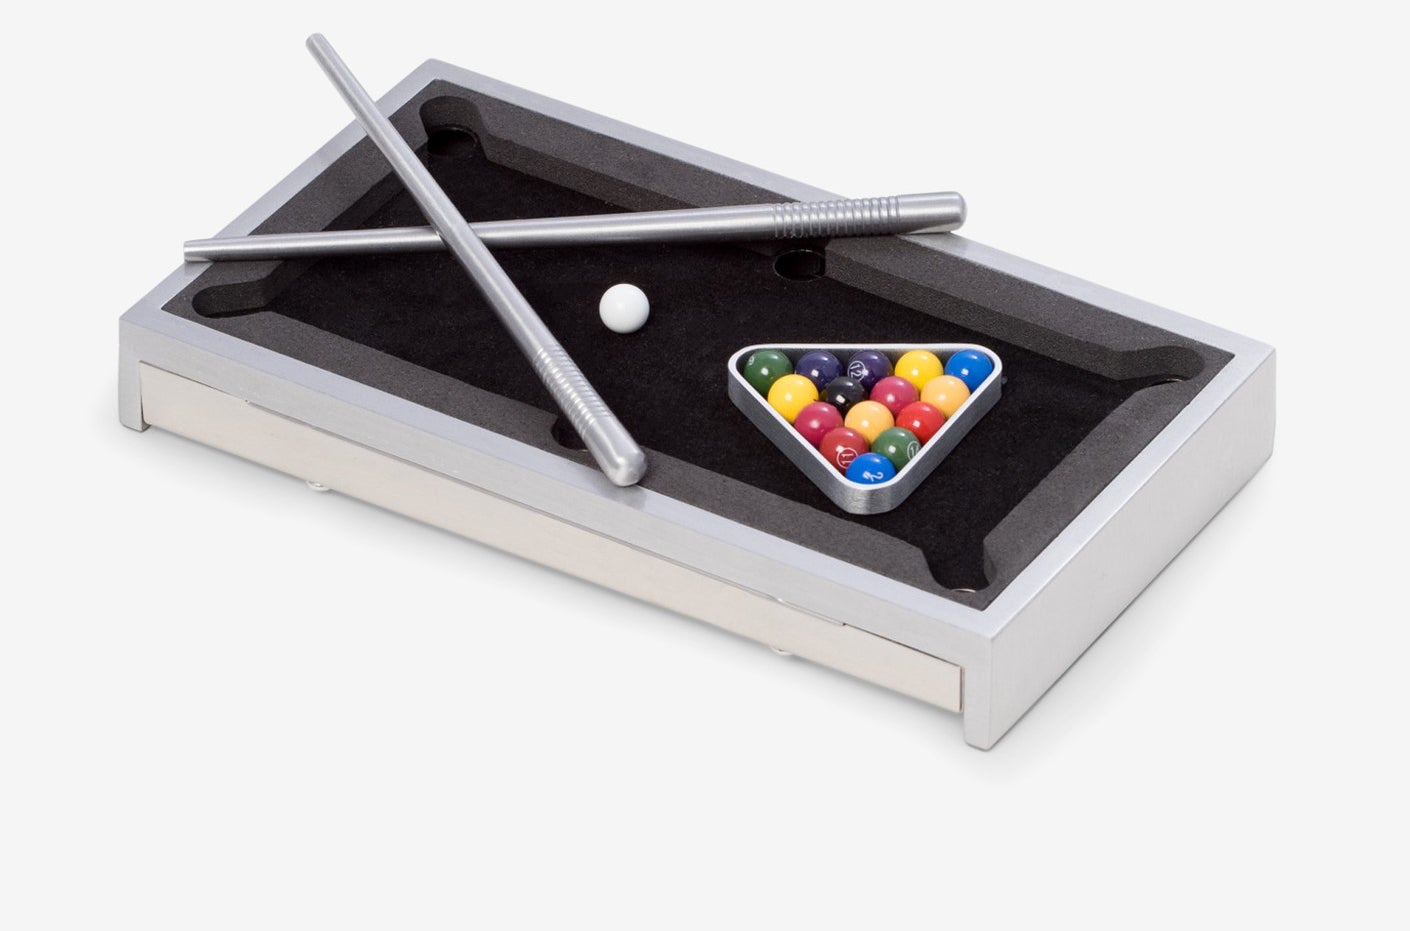 The tabletop pool game